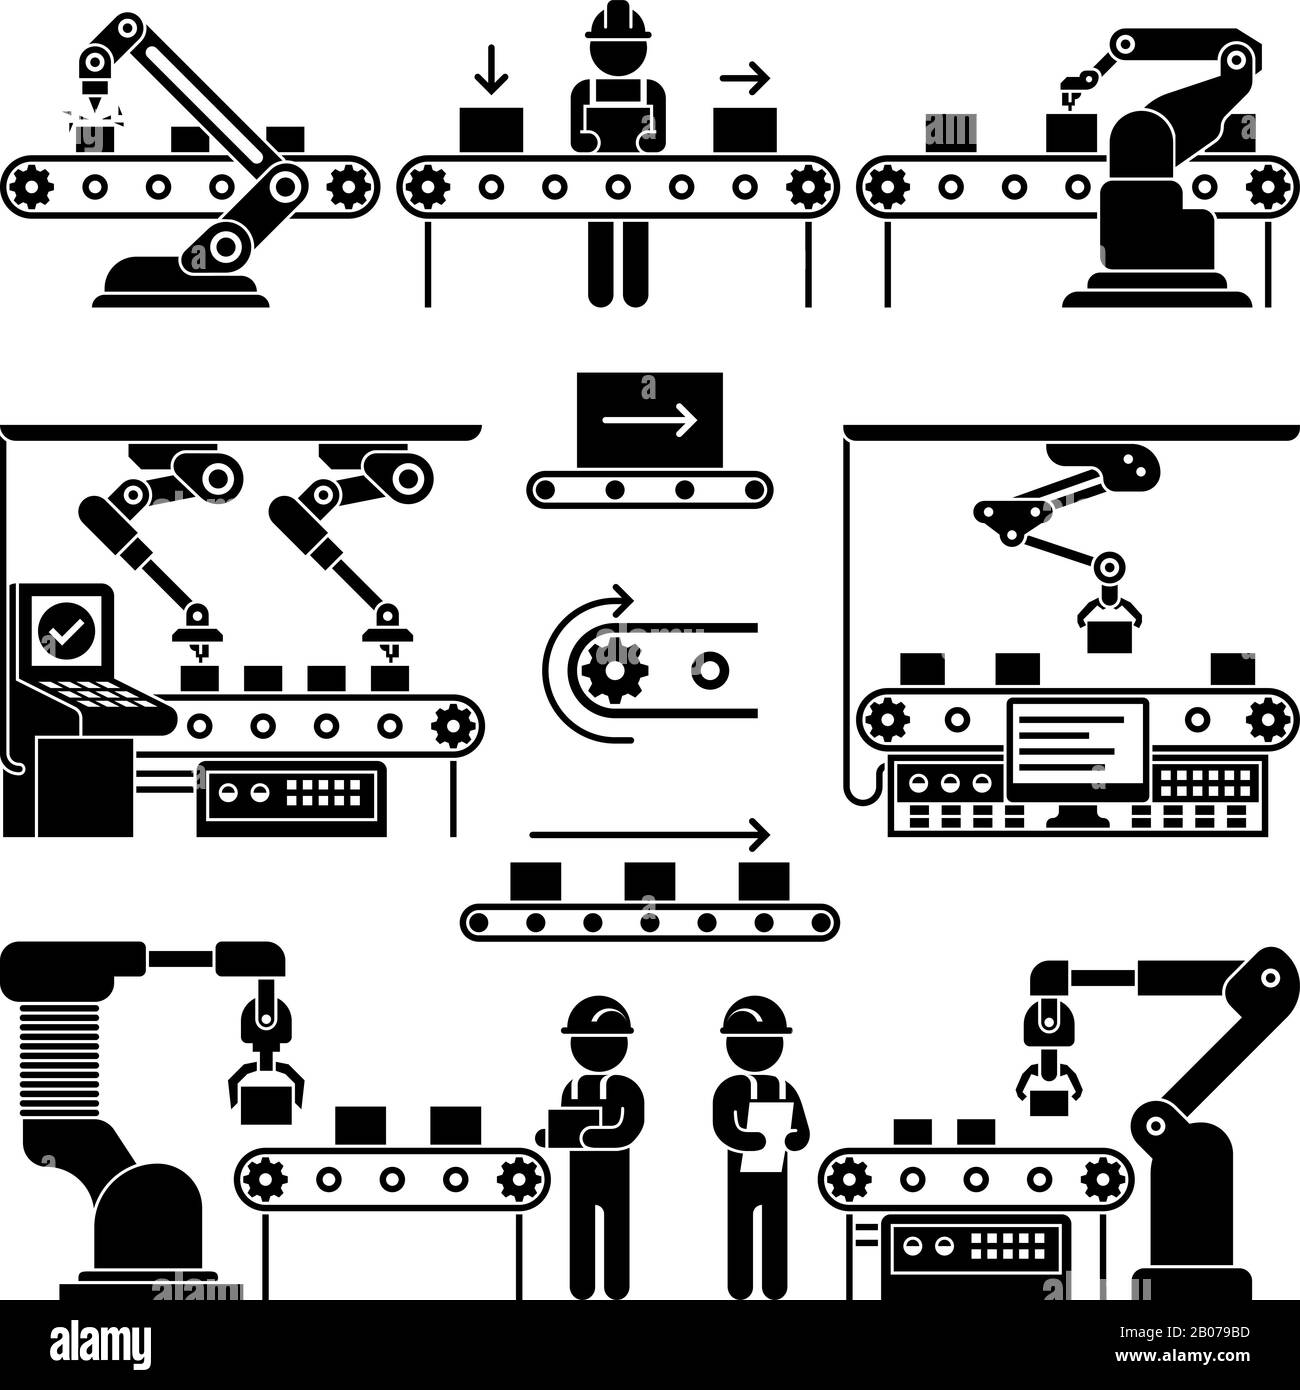 Conveyor production manufacturing line and workers vector icons. Black silhouette process automation on factory illustration Stock Vector